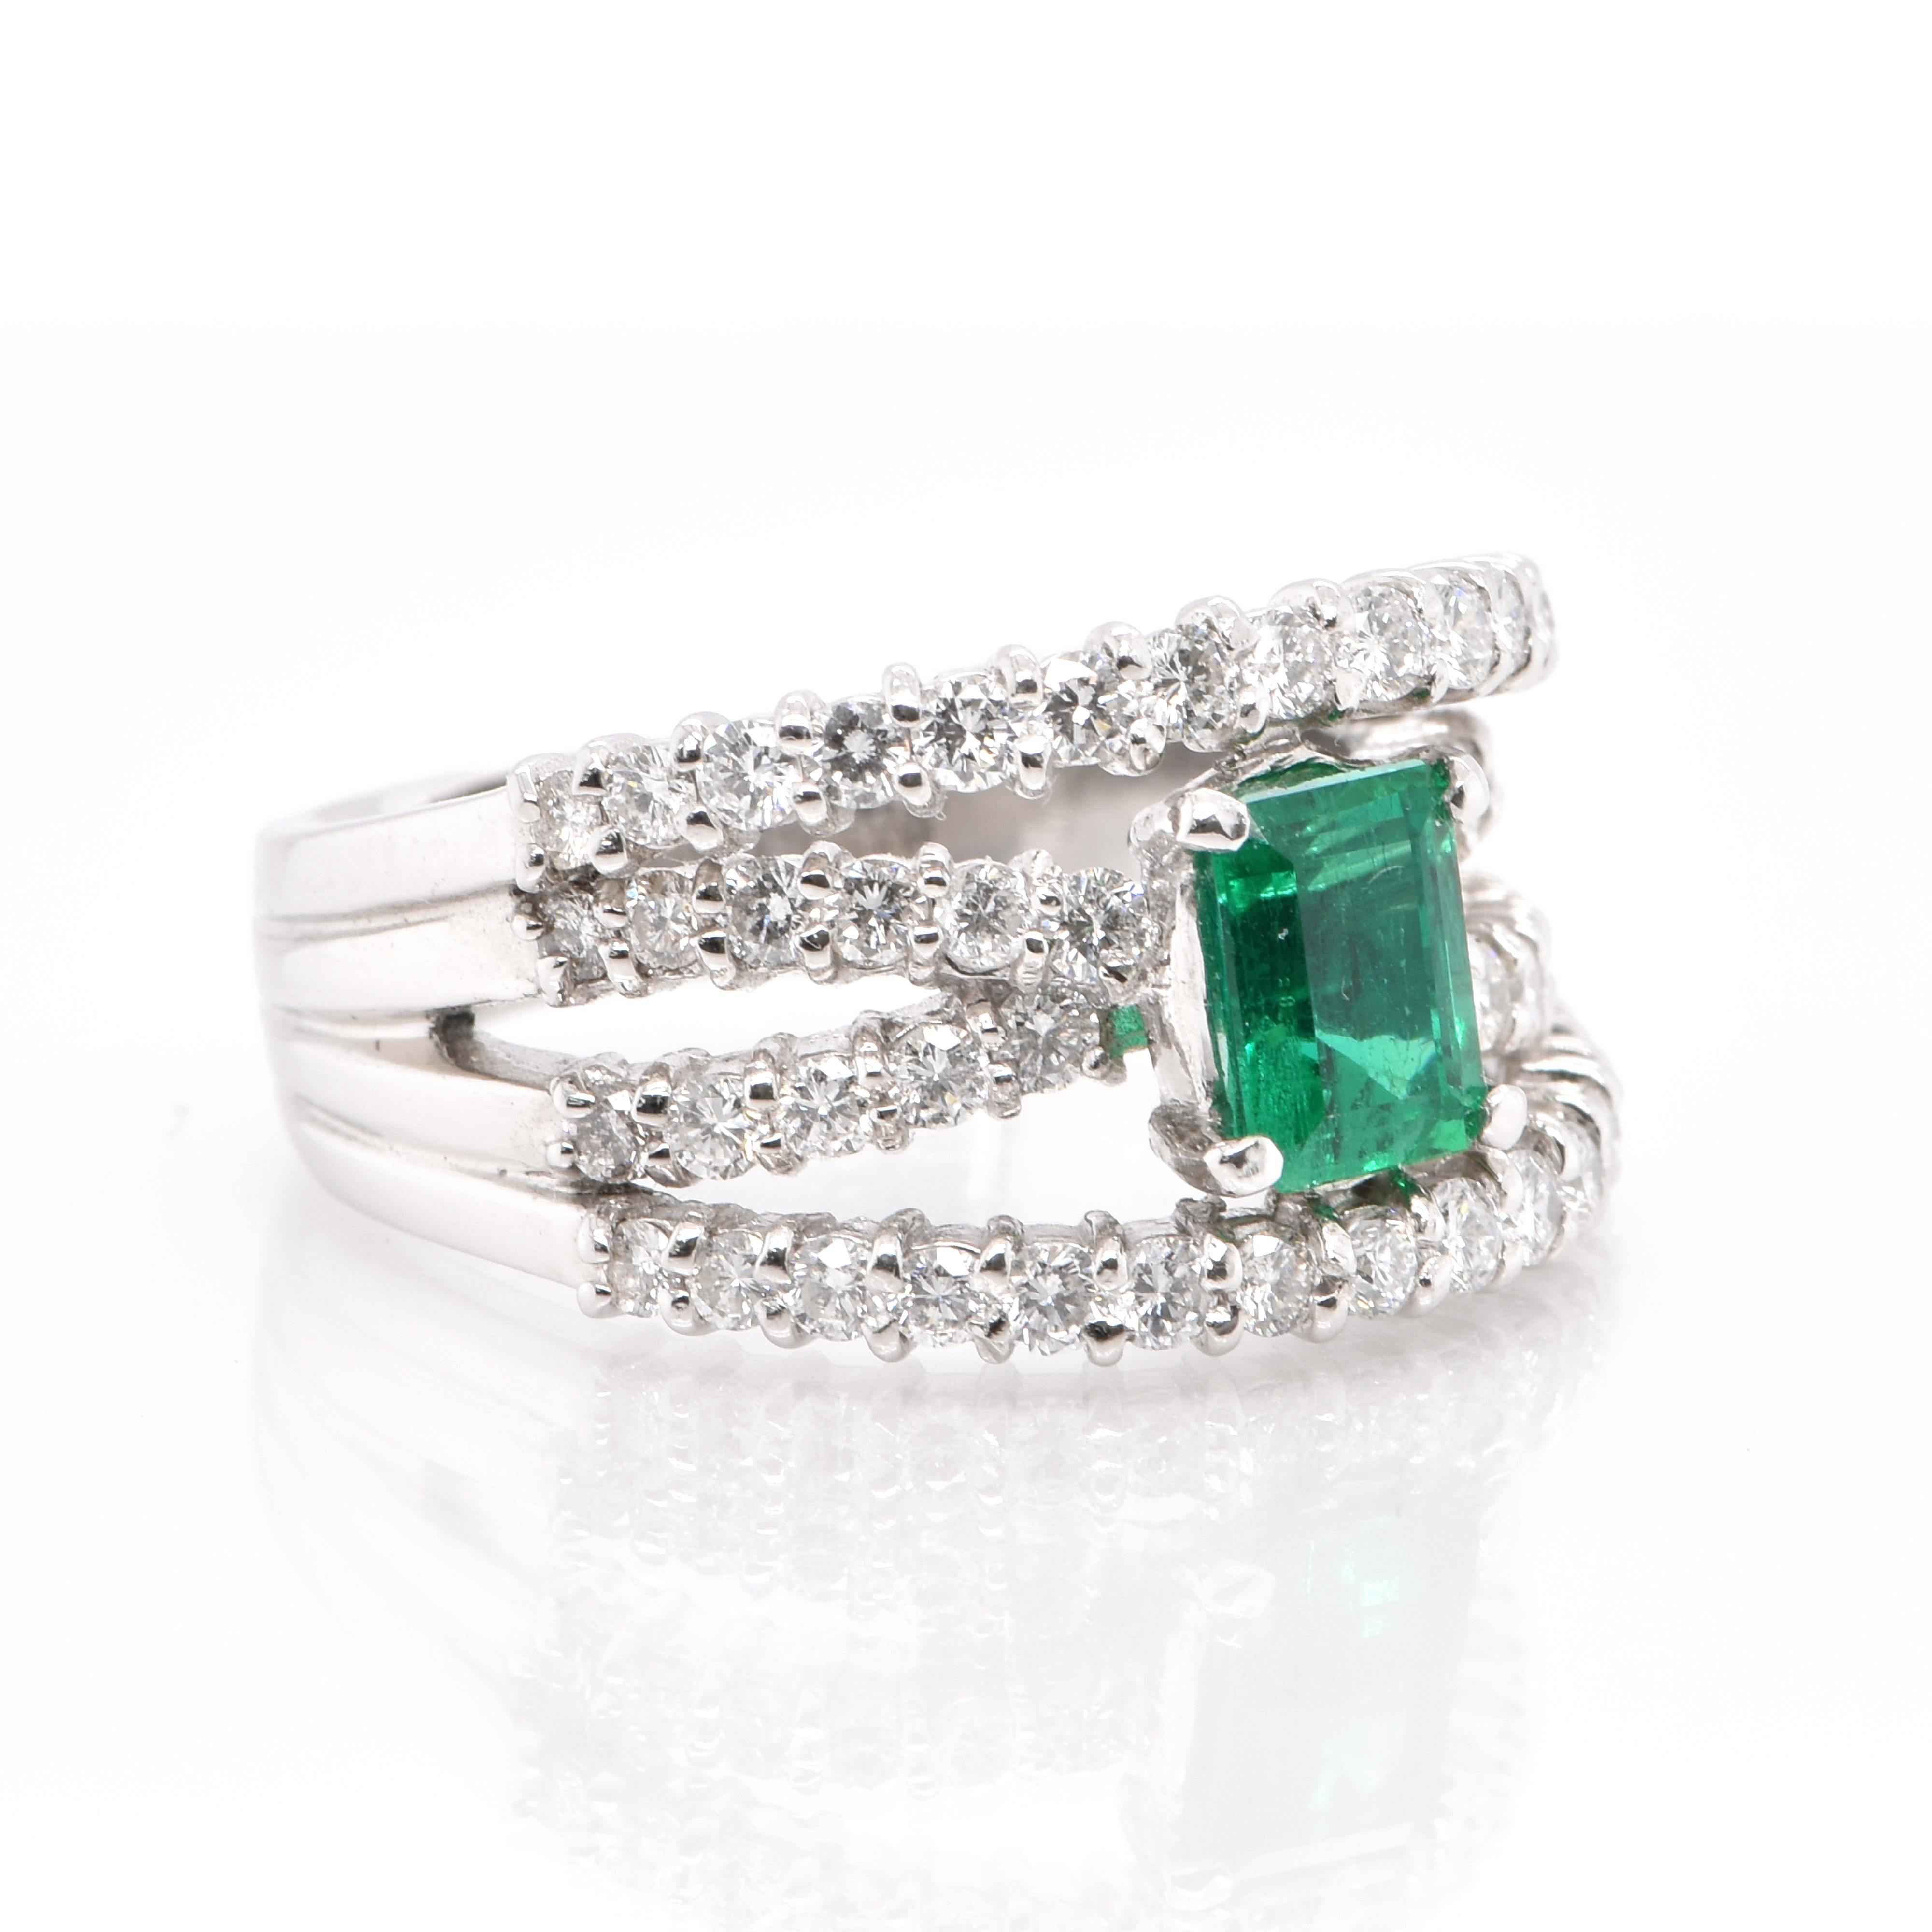 Modern 0.93 Carat, Natural, Colombian Emerald and Diamond Ring Set in Platinum